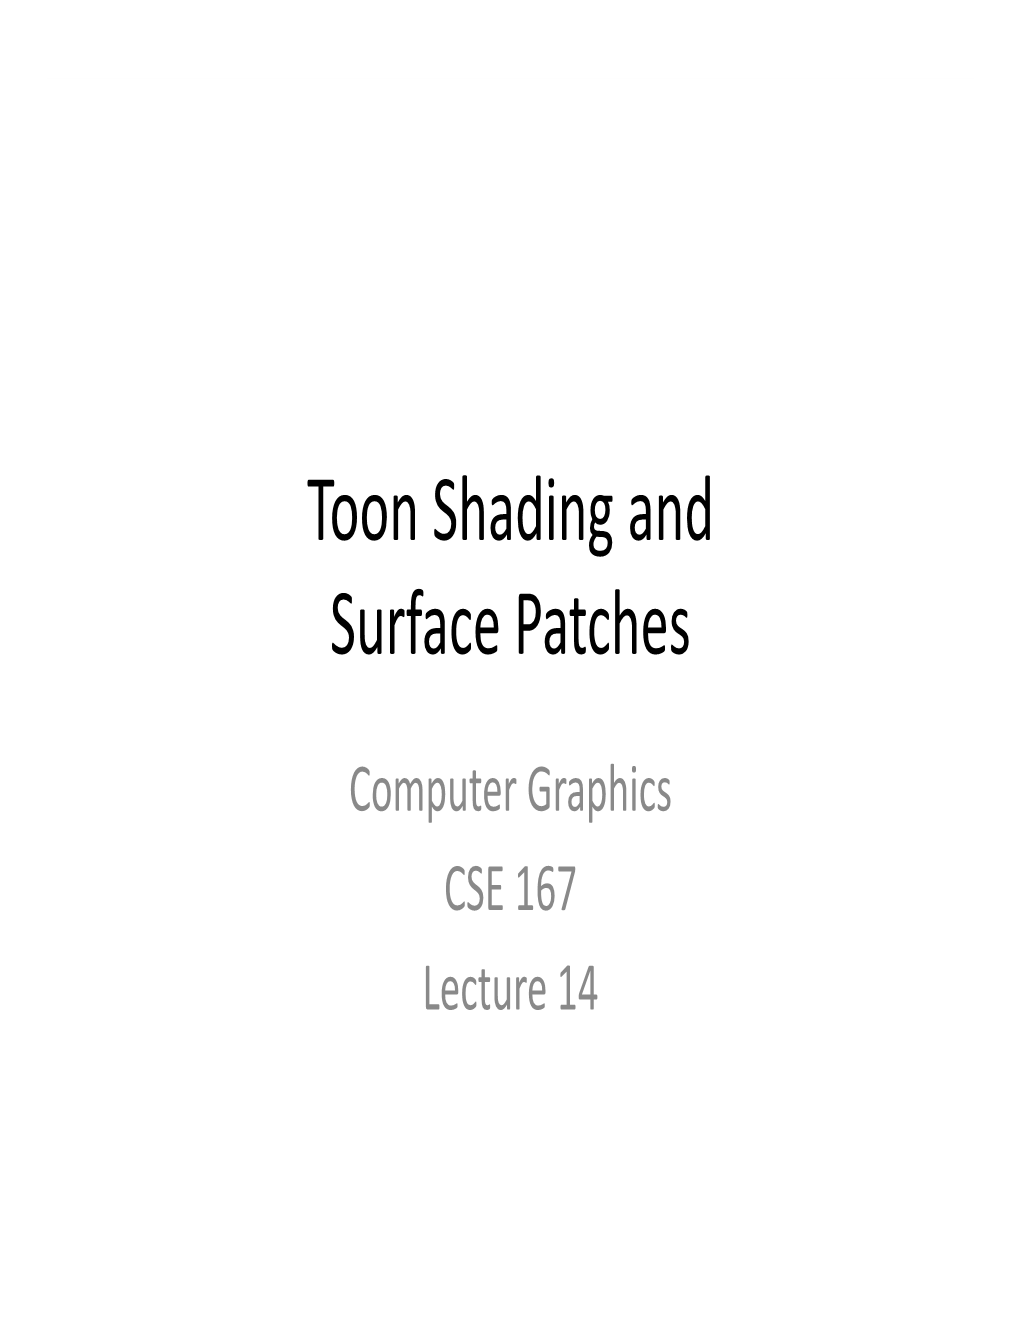 Toon Shading and Surface Patches